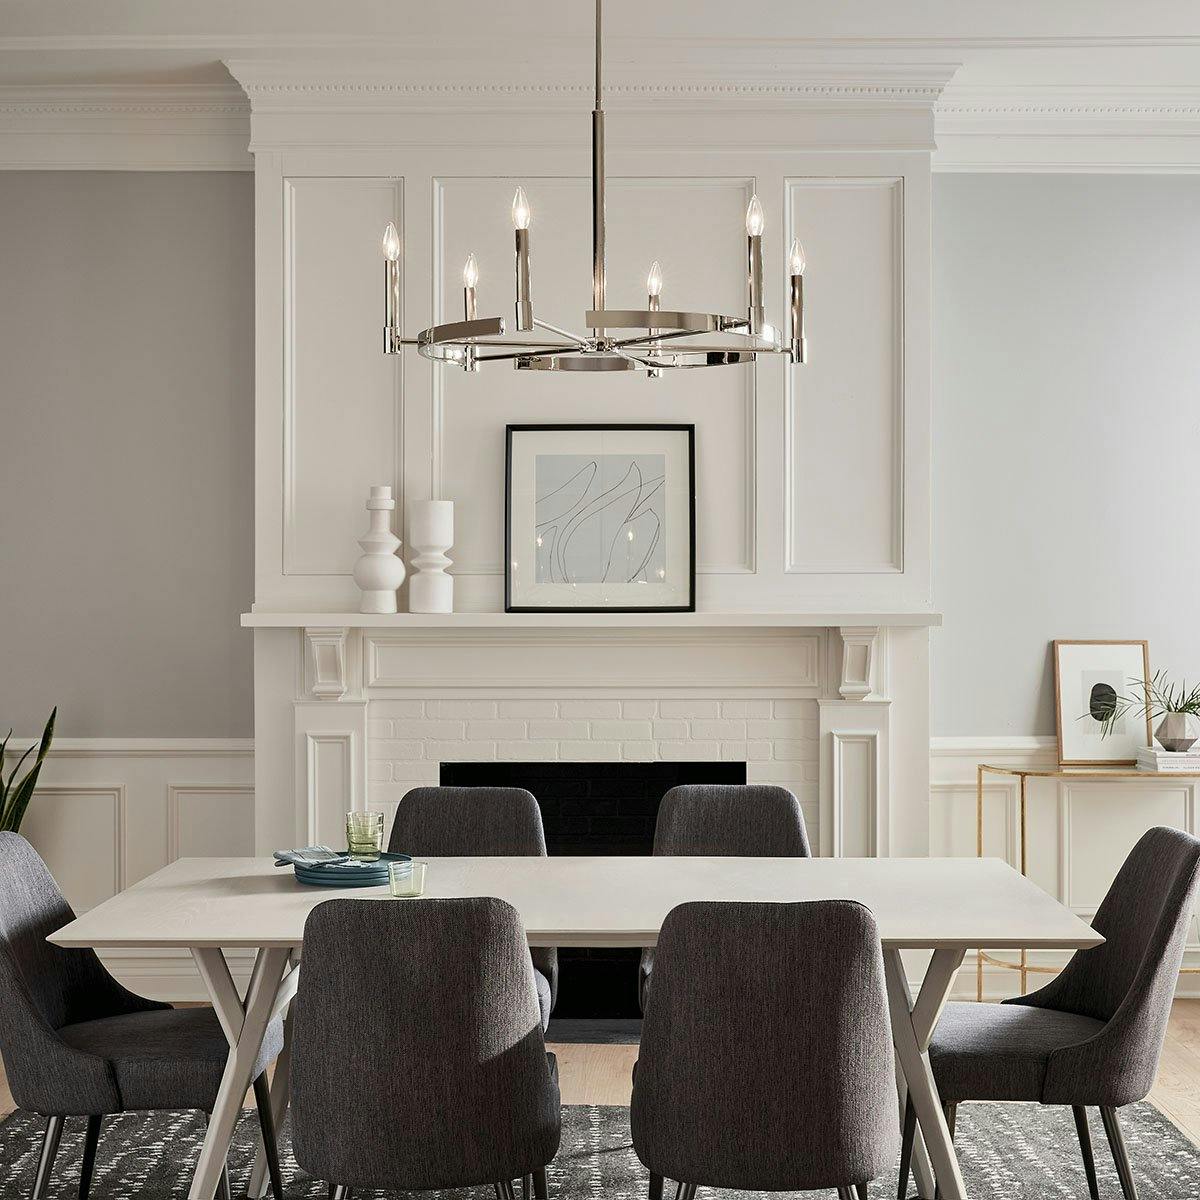 Day time Dining Room image featuring Tolani chandelier 52427PN